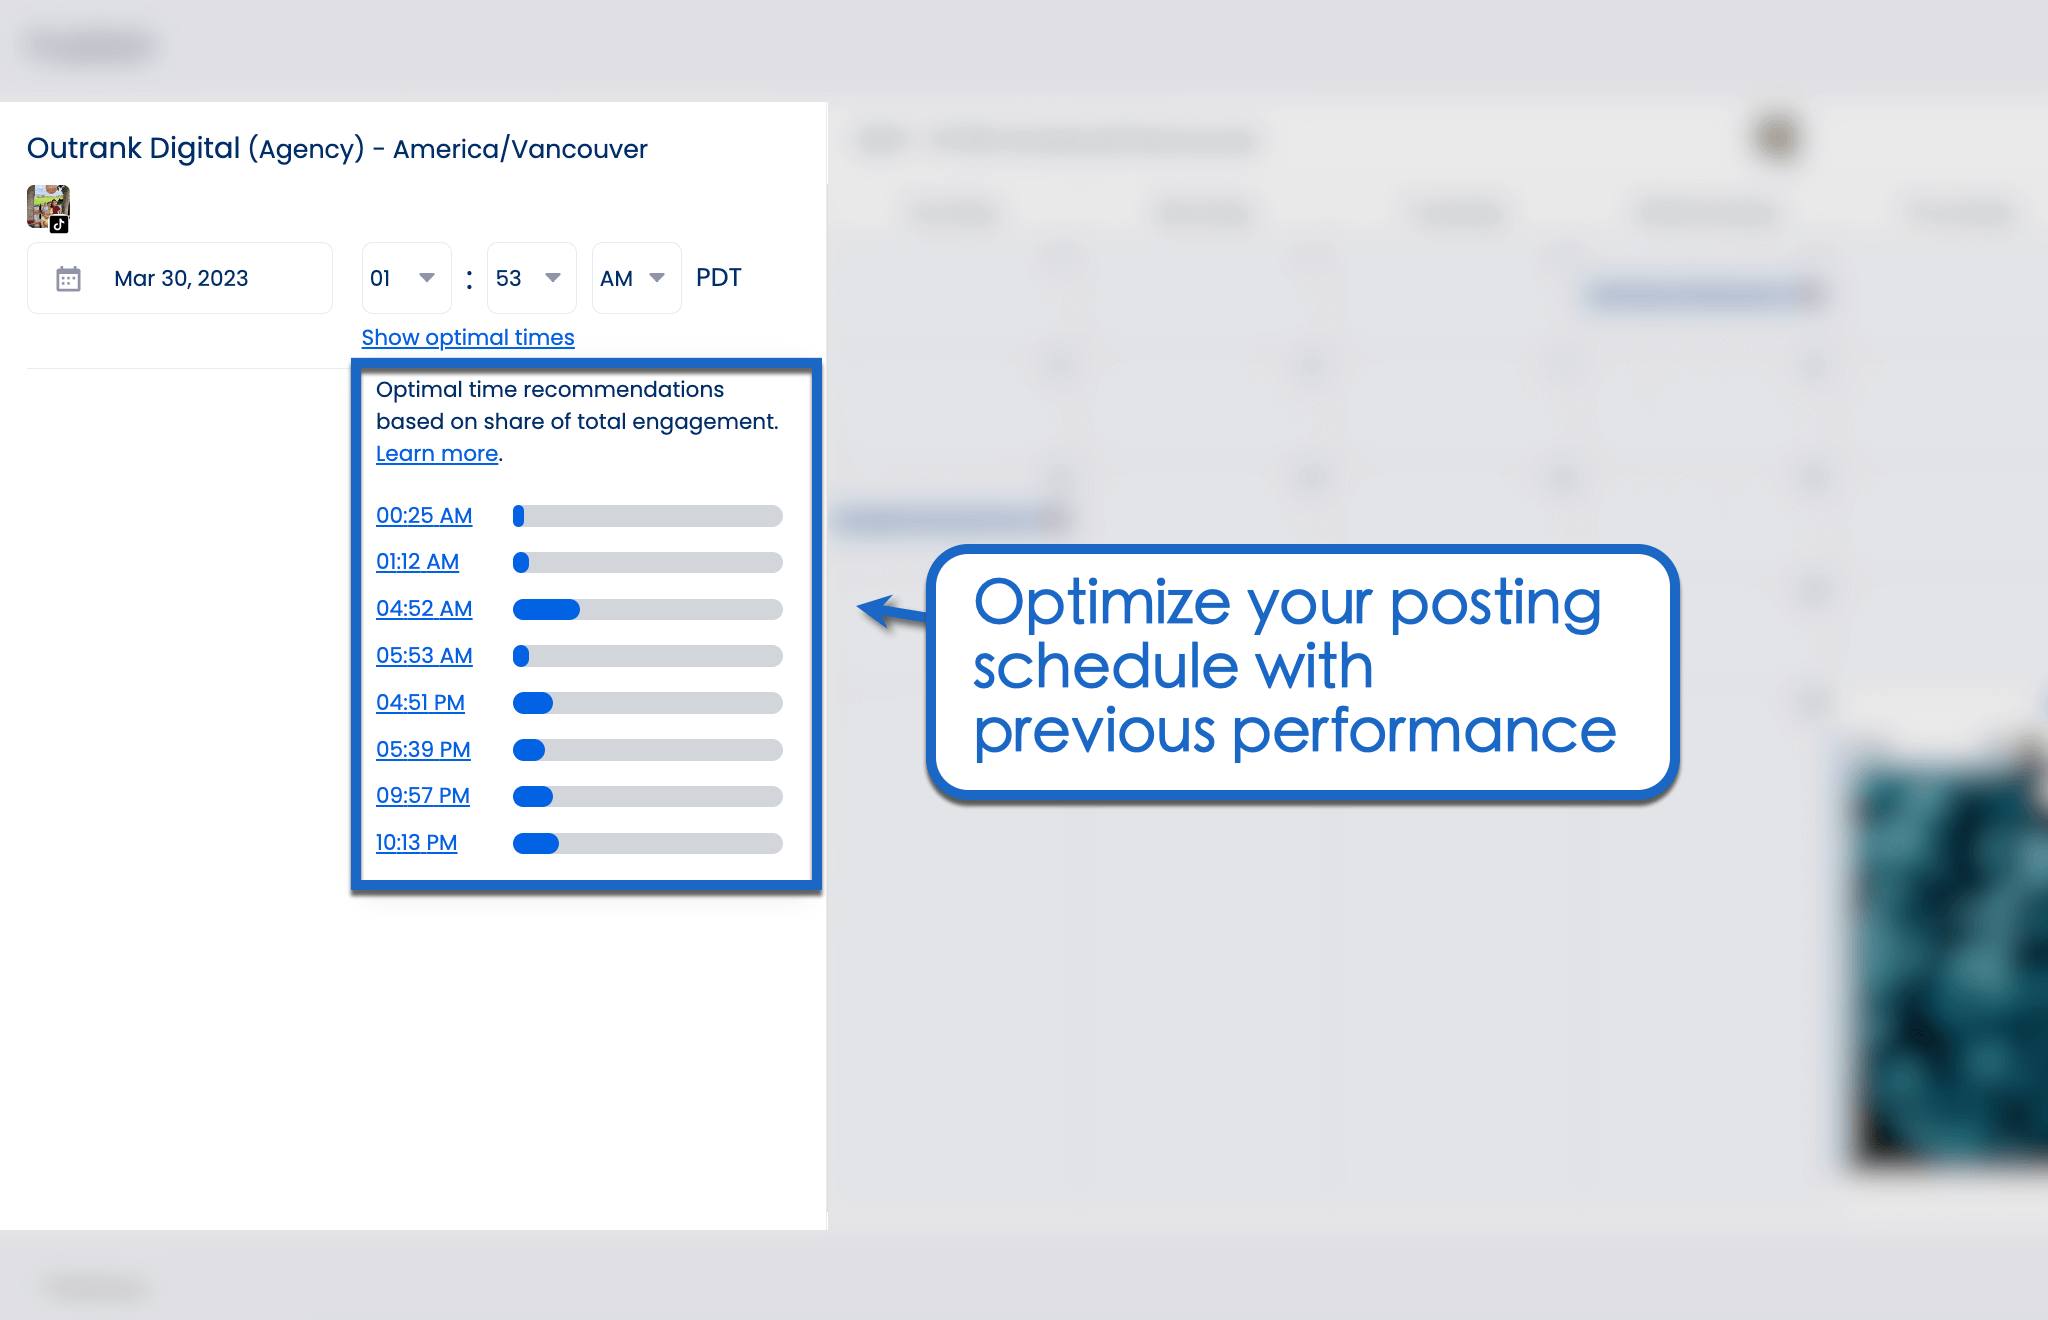 Optimize your posting schedule.